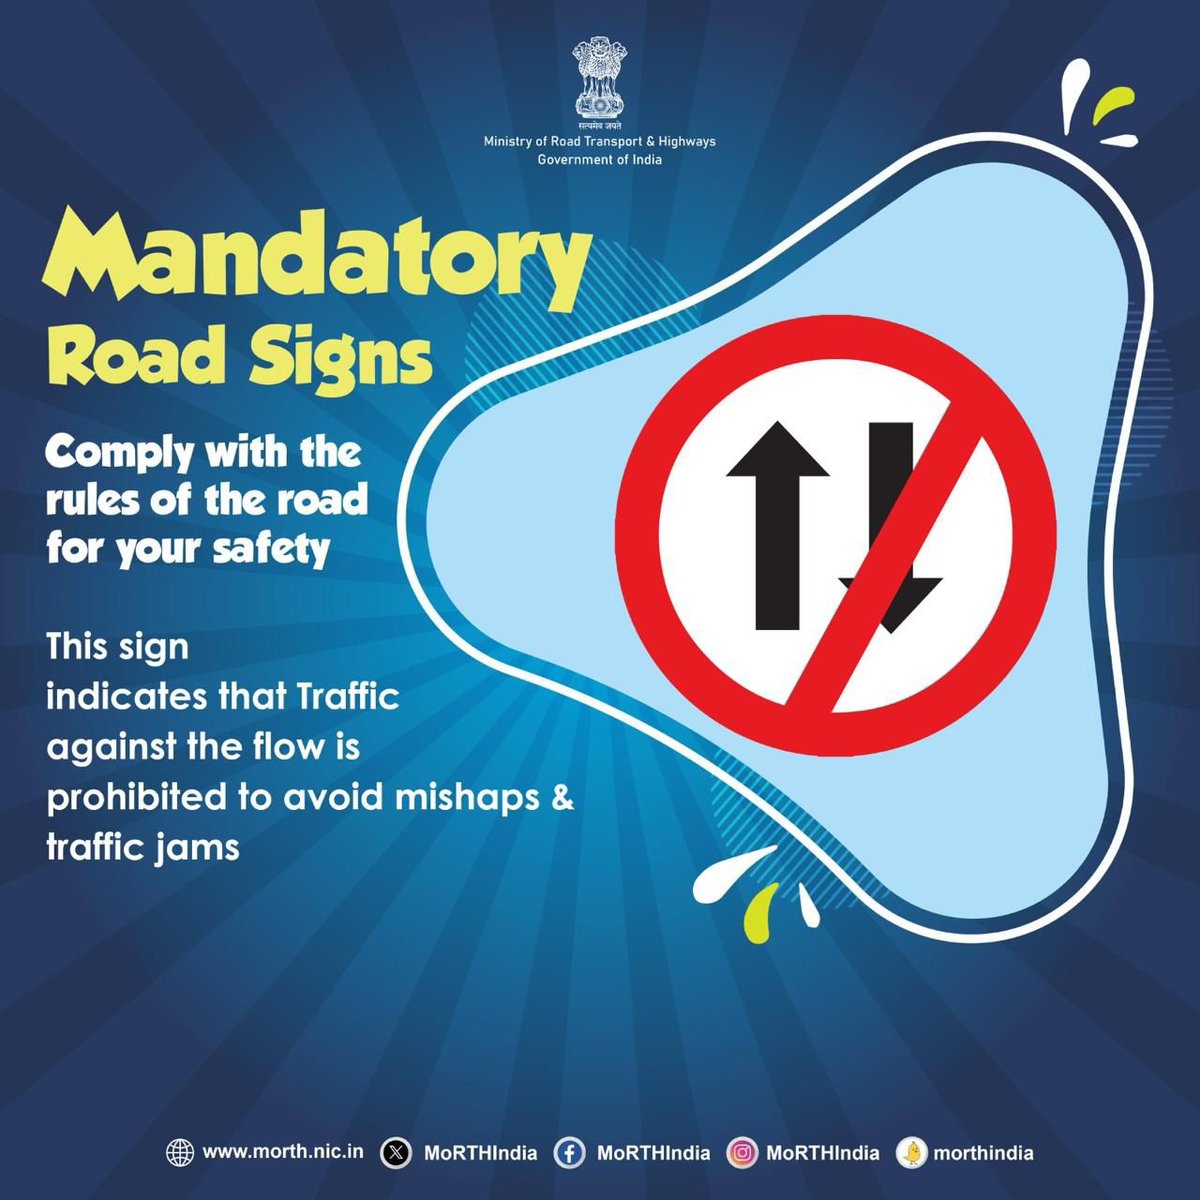 Mandatory road signs are essential for ensuring road safety. They guide drivers with instructions and actions that must be followed, such as stopping at a stop sign, yielding to others, or observing speed limits. #MandatoryRoadSigns #RoadSafety #DriveResponsibly